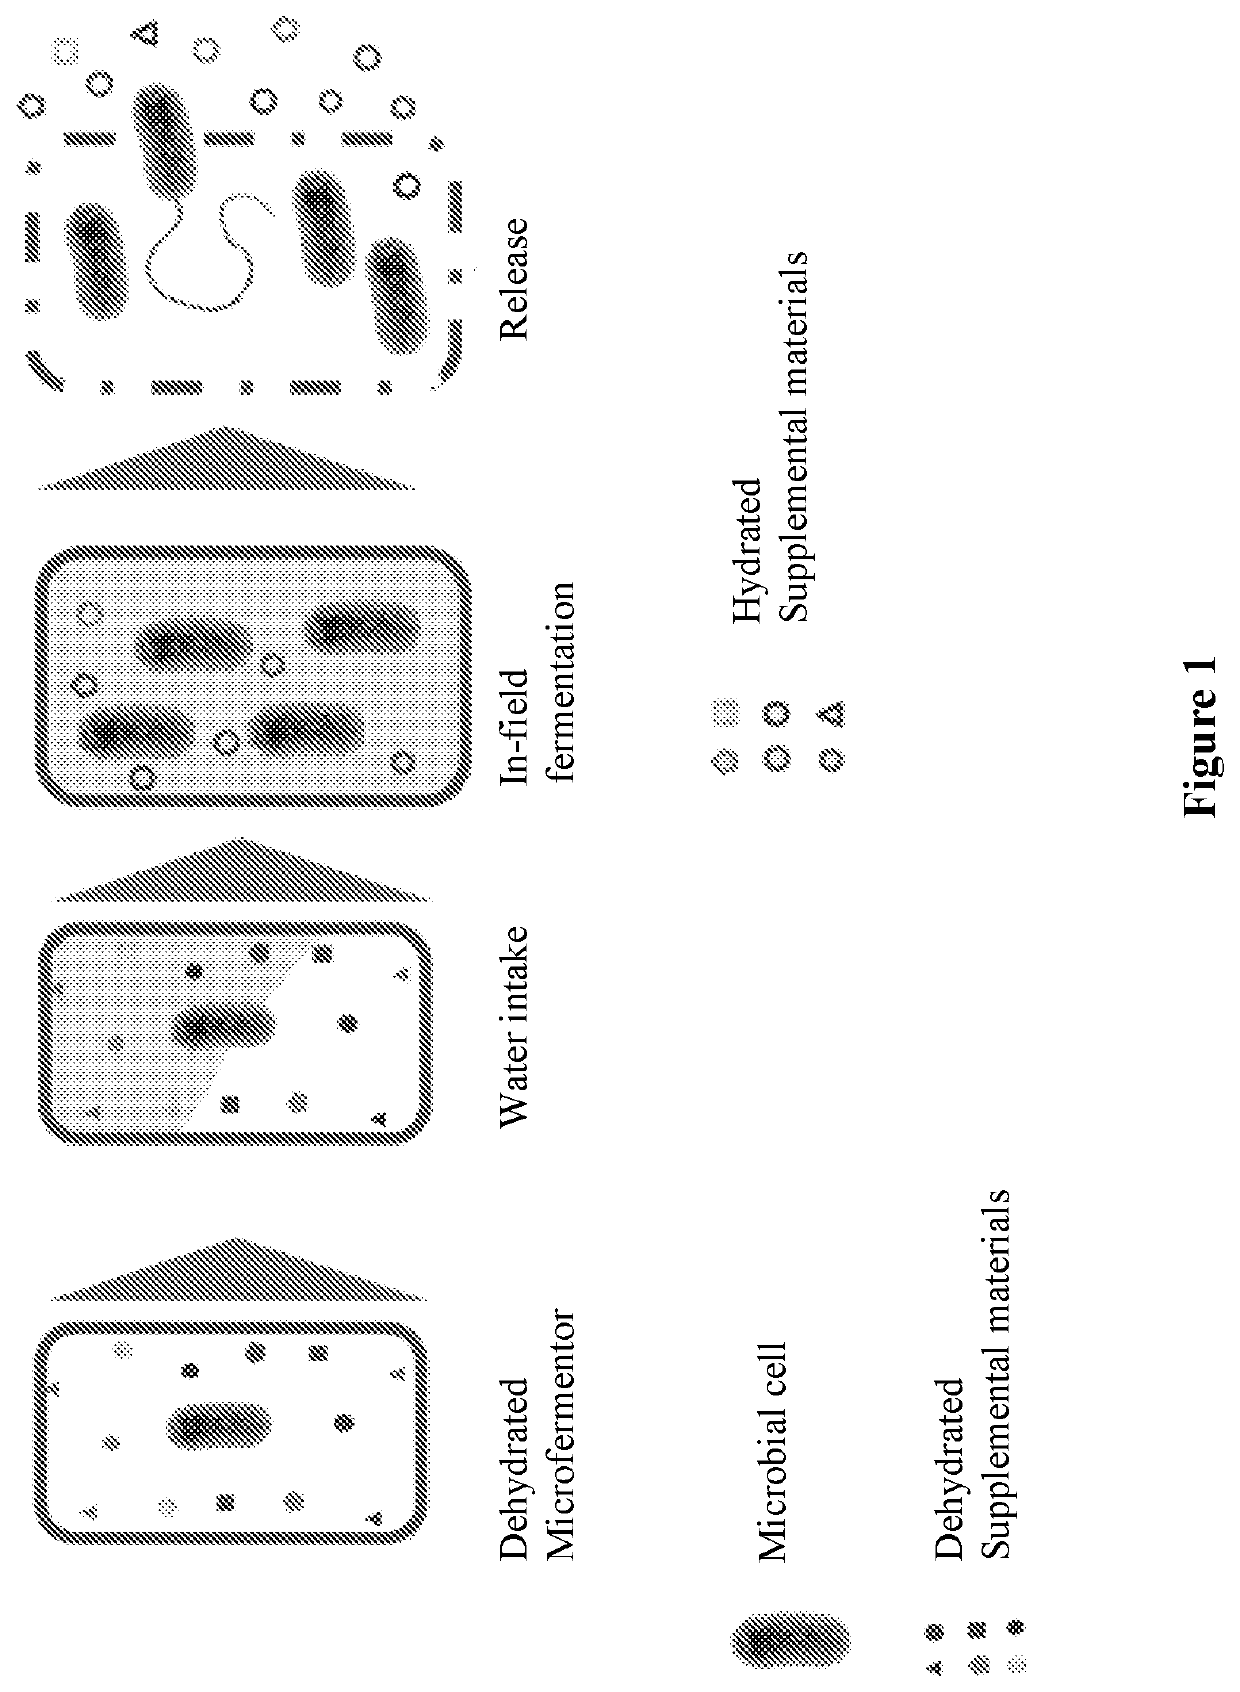 Encapsulated microorganisms and methods of using same